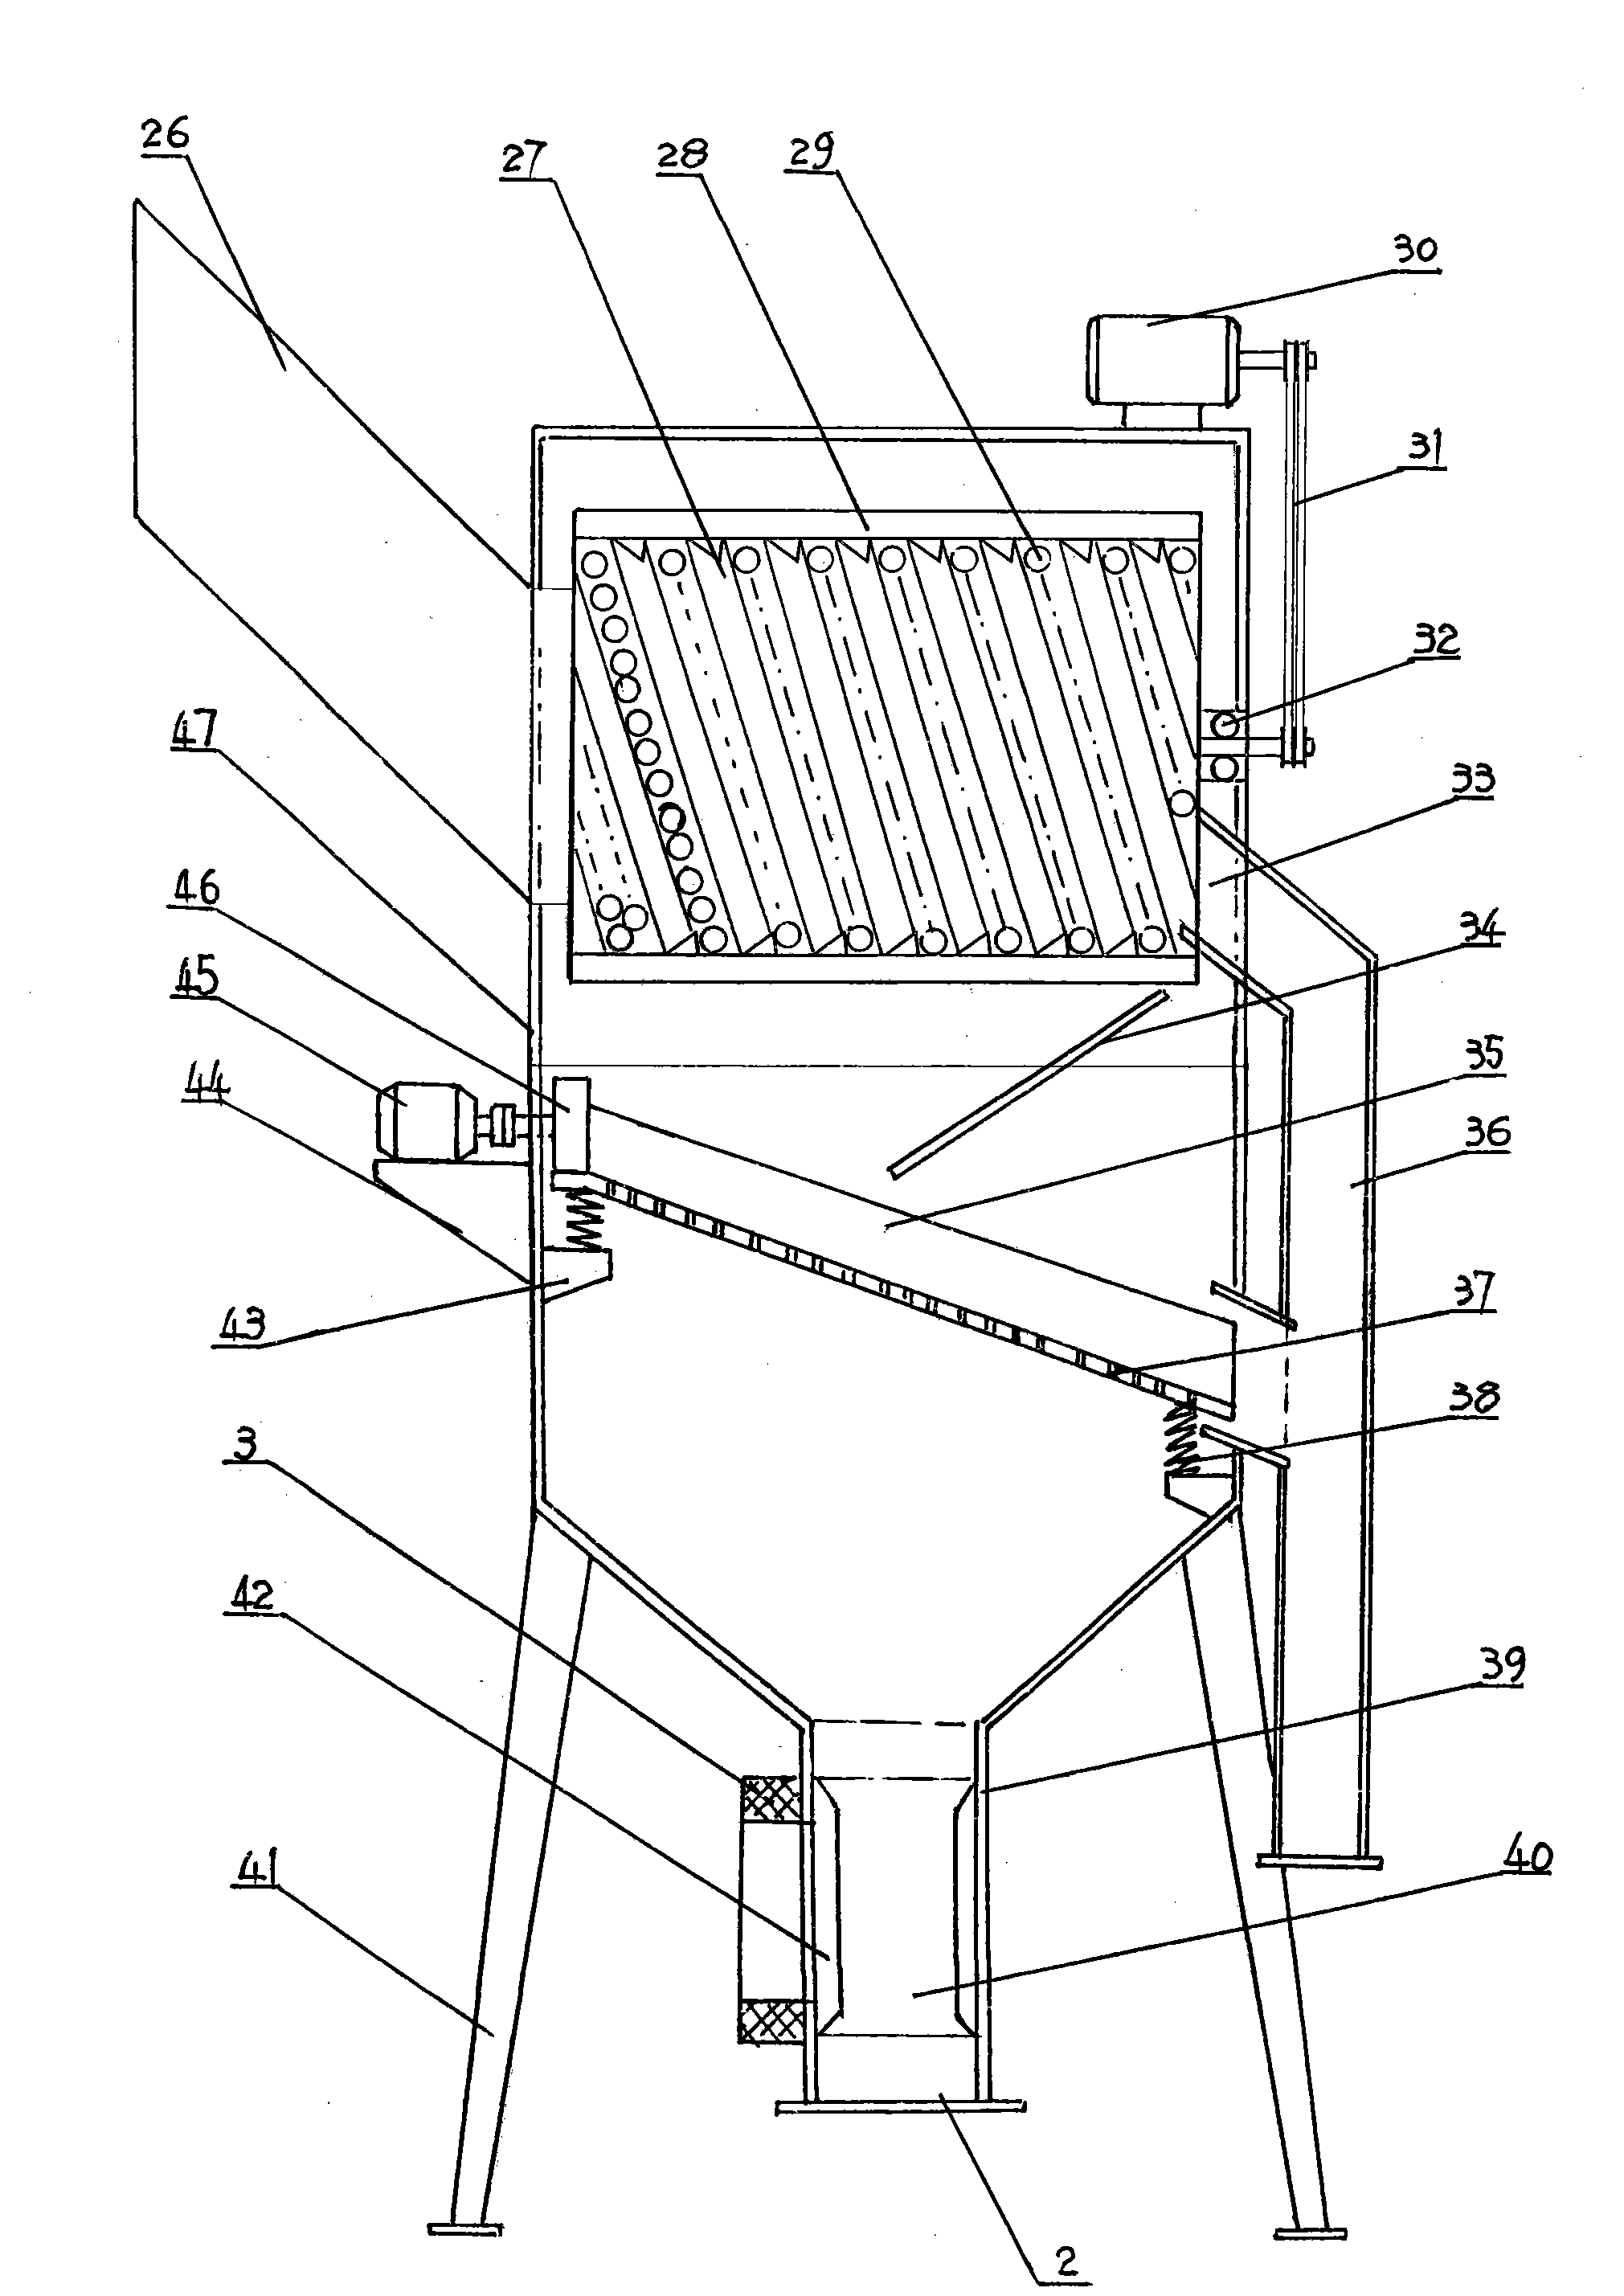 Method and system for recycling hazardous lead solid waste